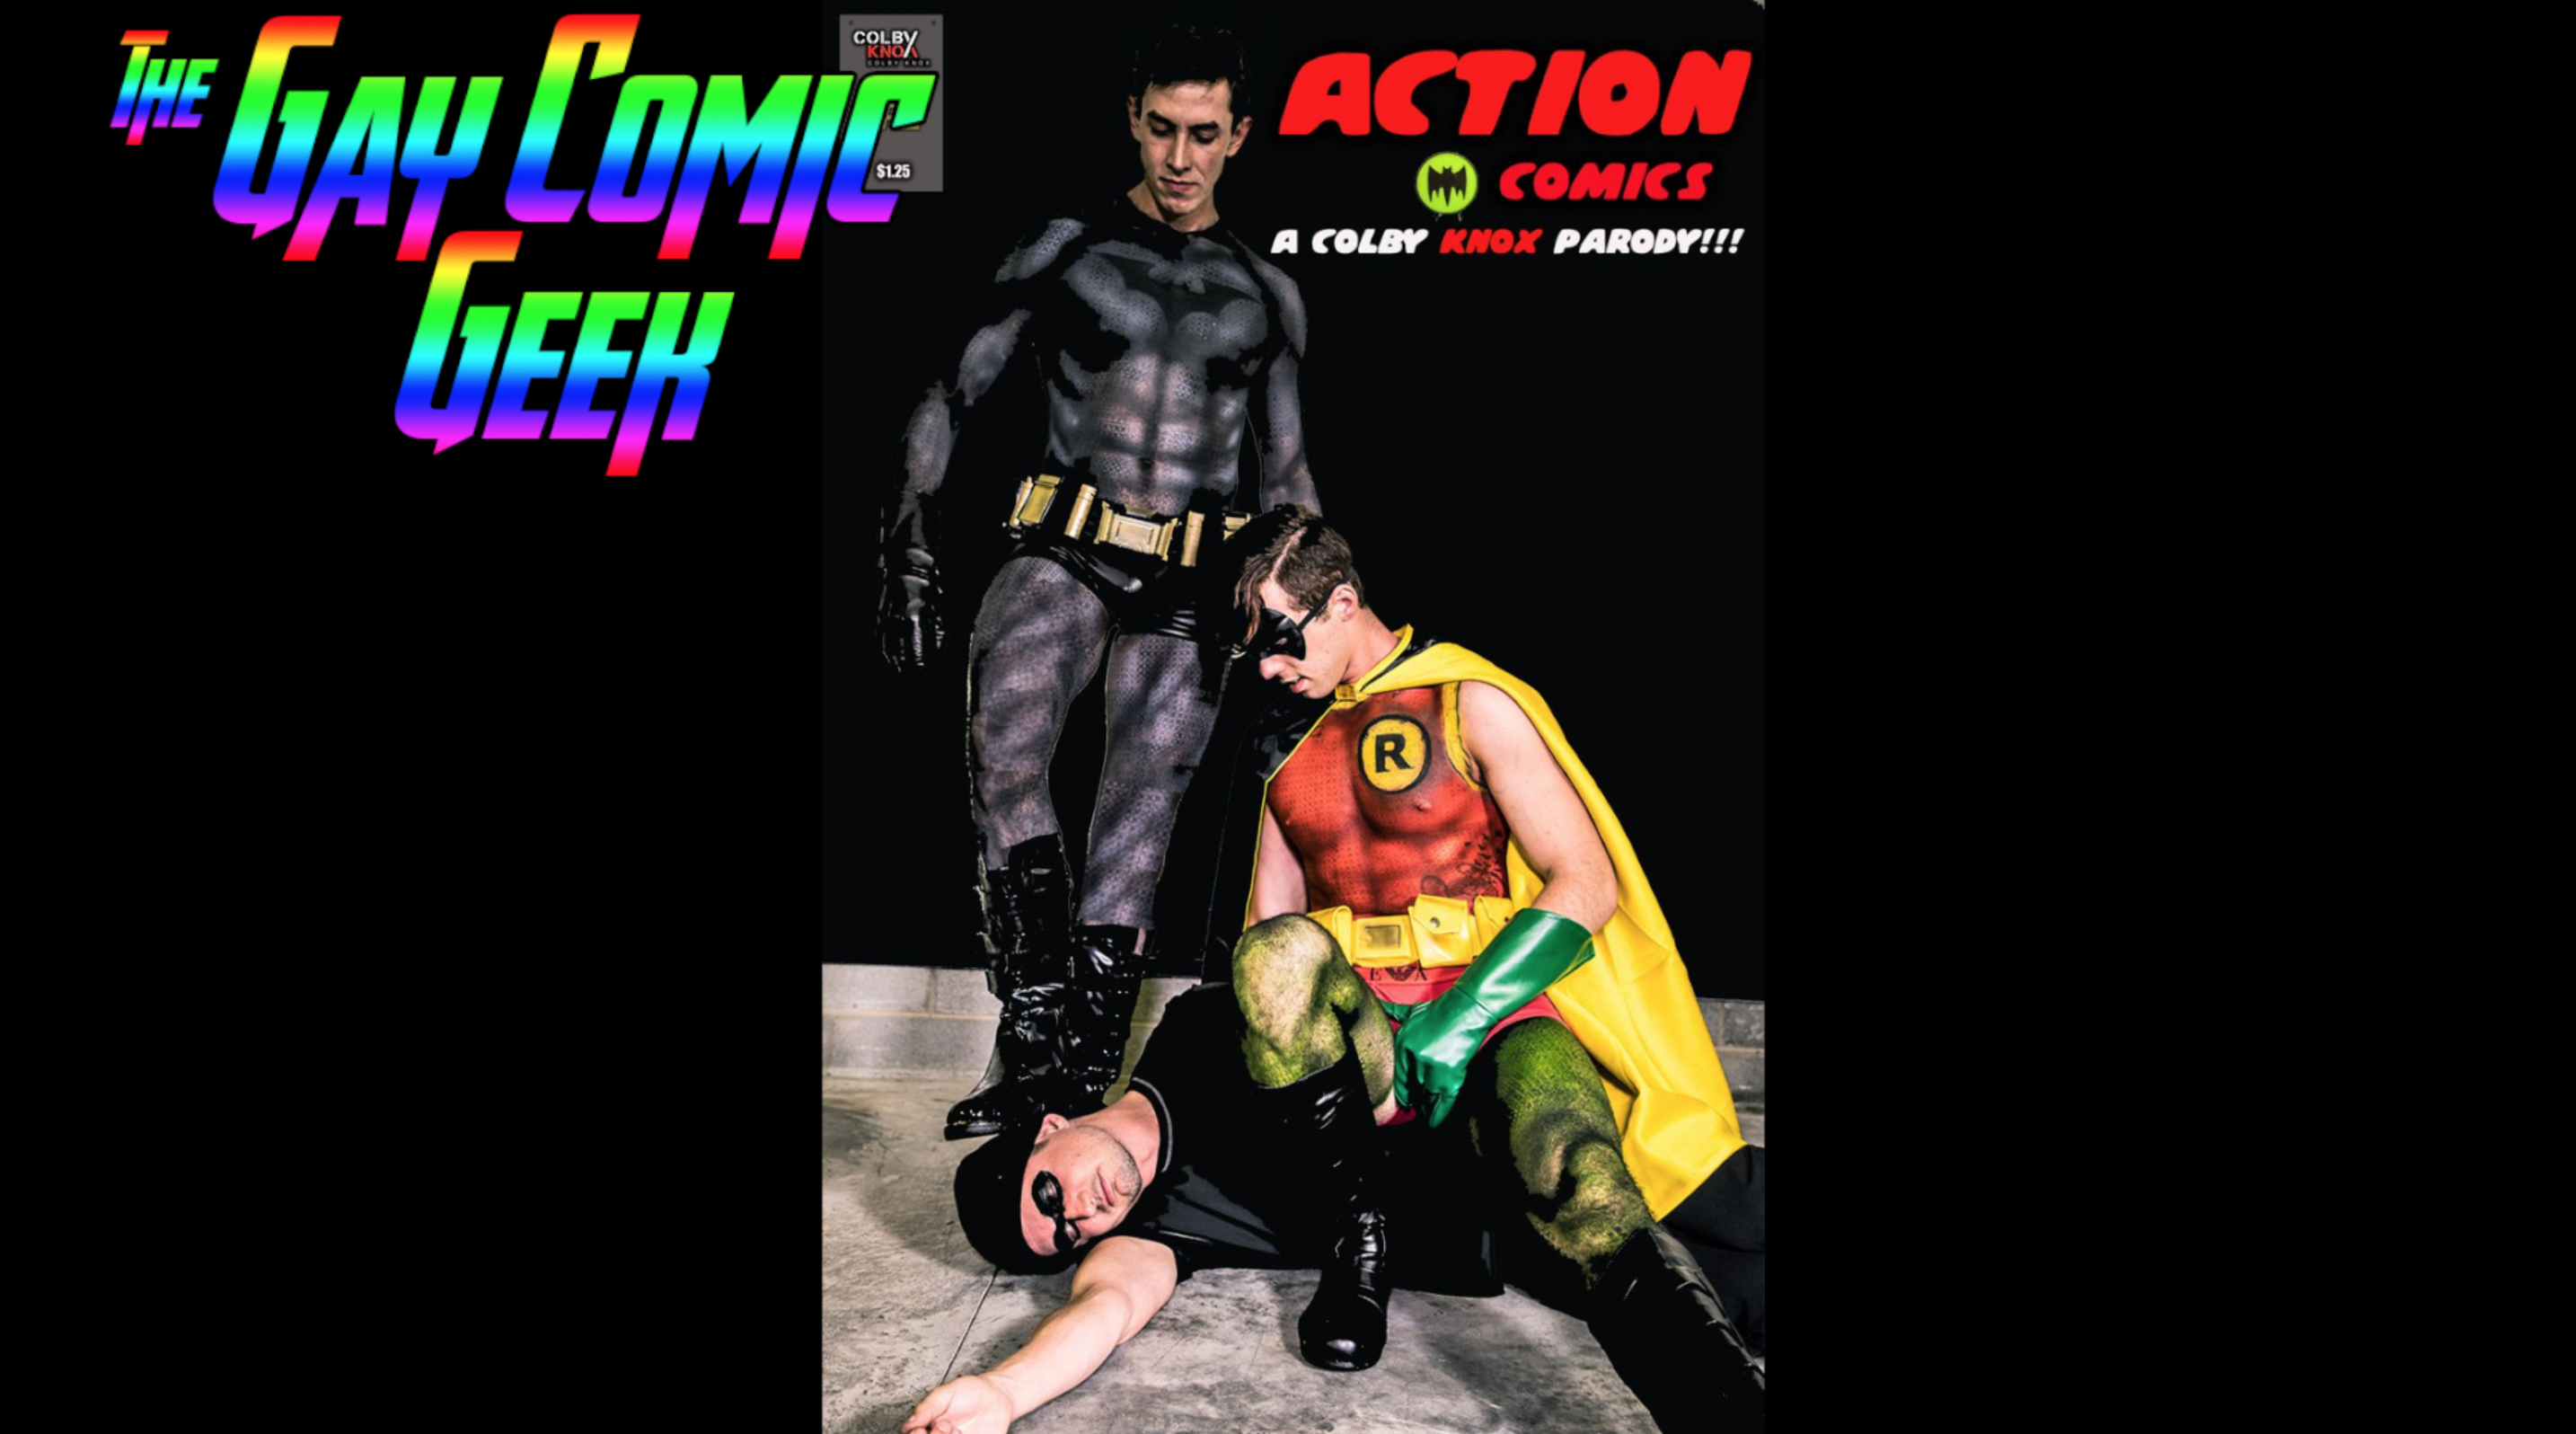 The Adventures of Batman and Robin Gay XXX Parody Part 3 â€“ ColbyKnox Review  (NSFW)